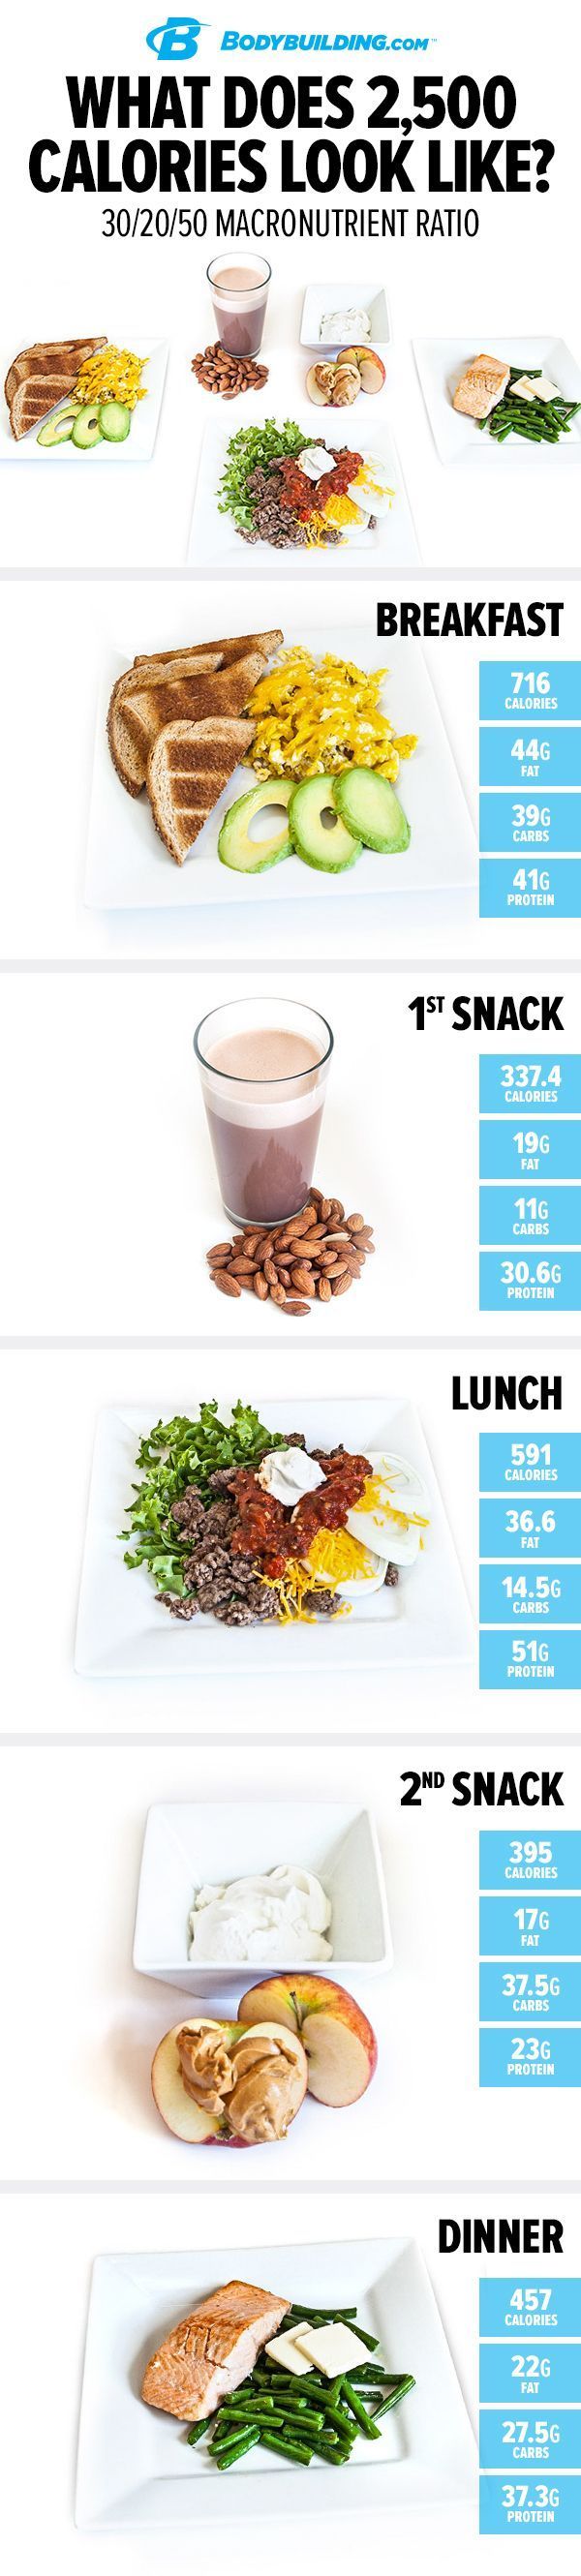 What Does 2,500 Calories Look Like?